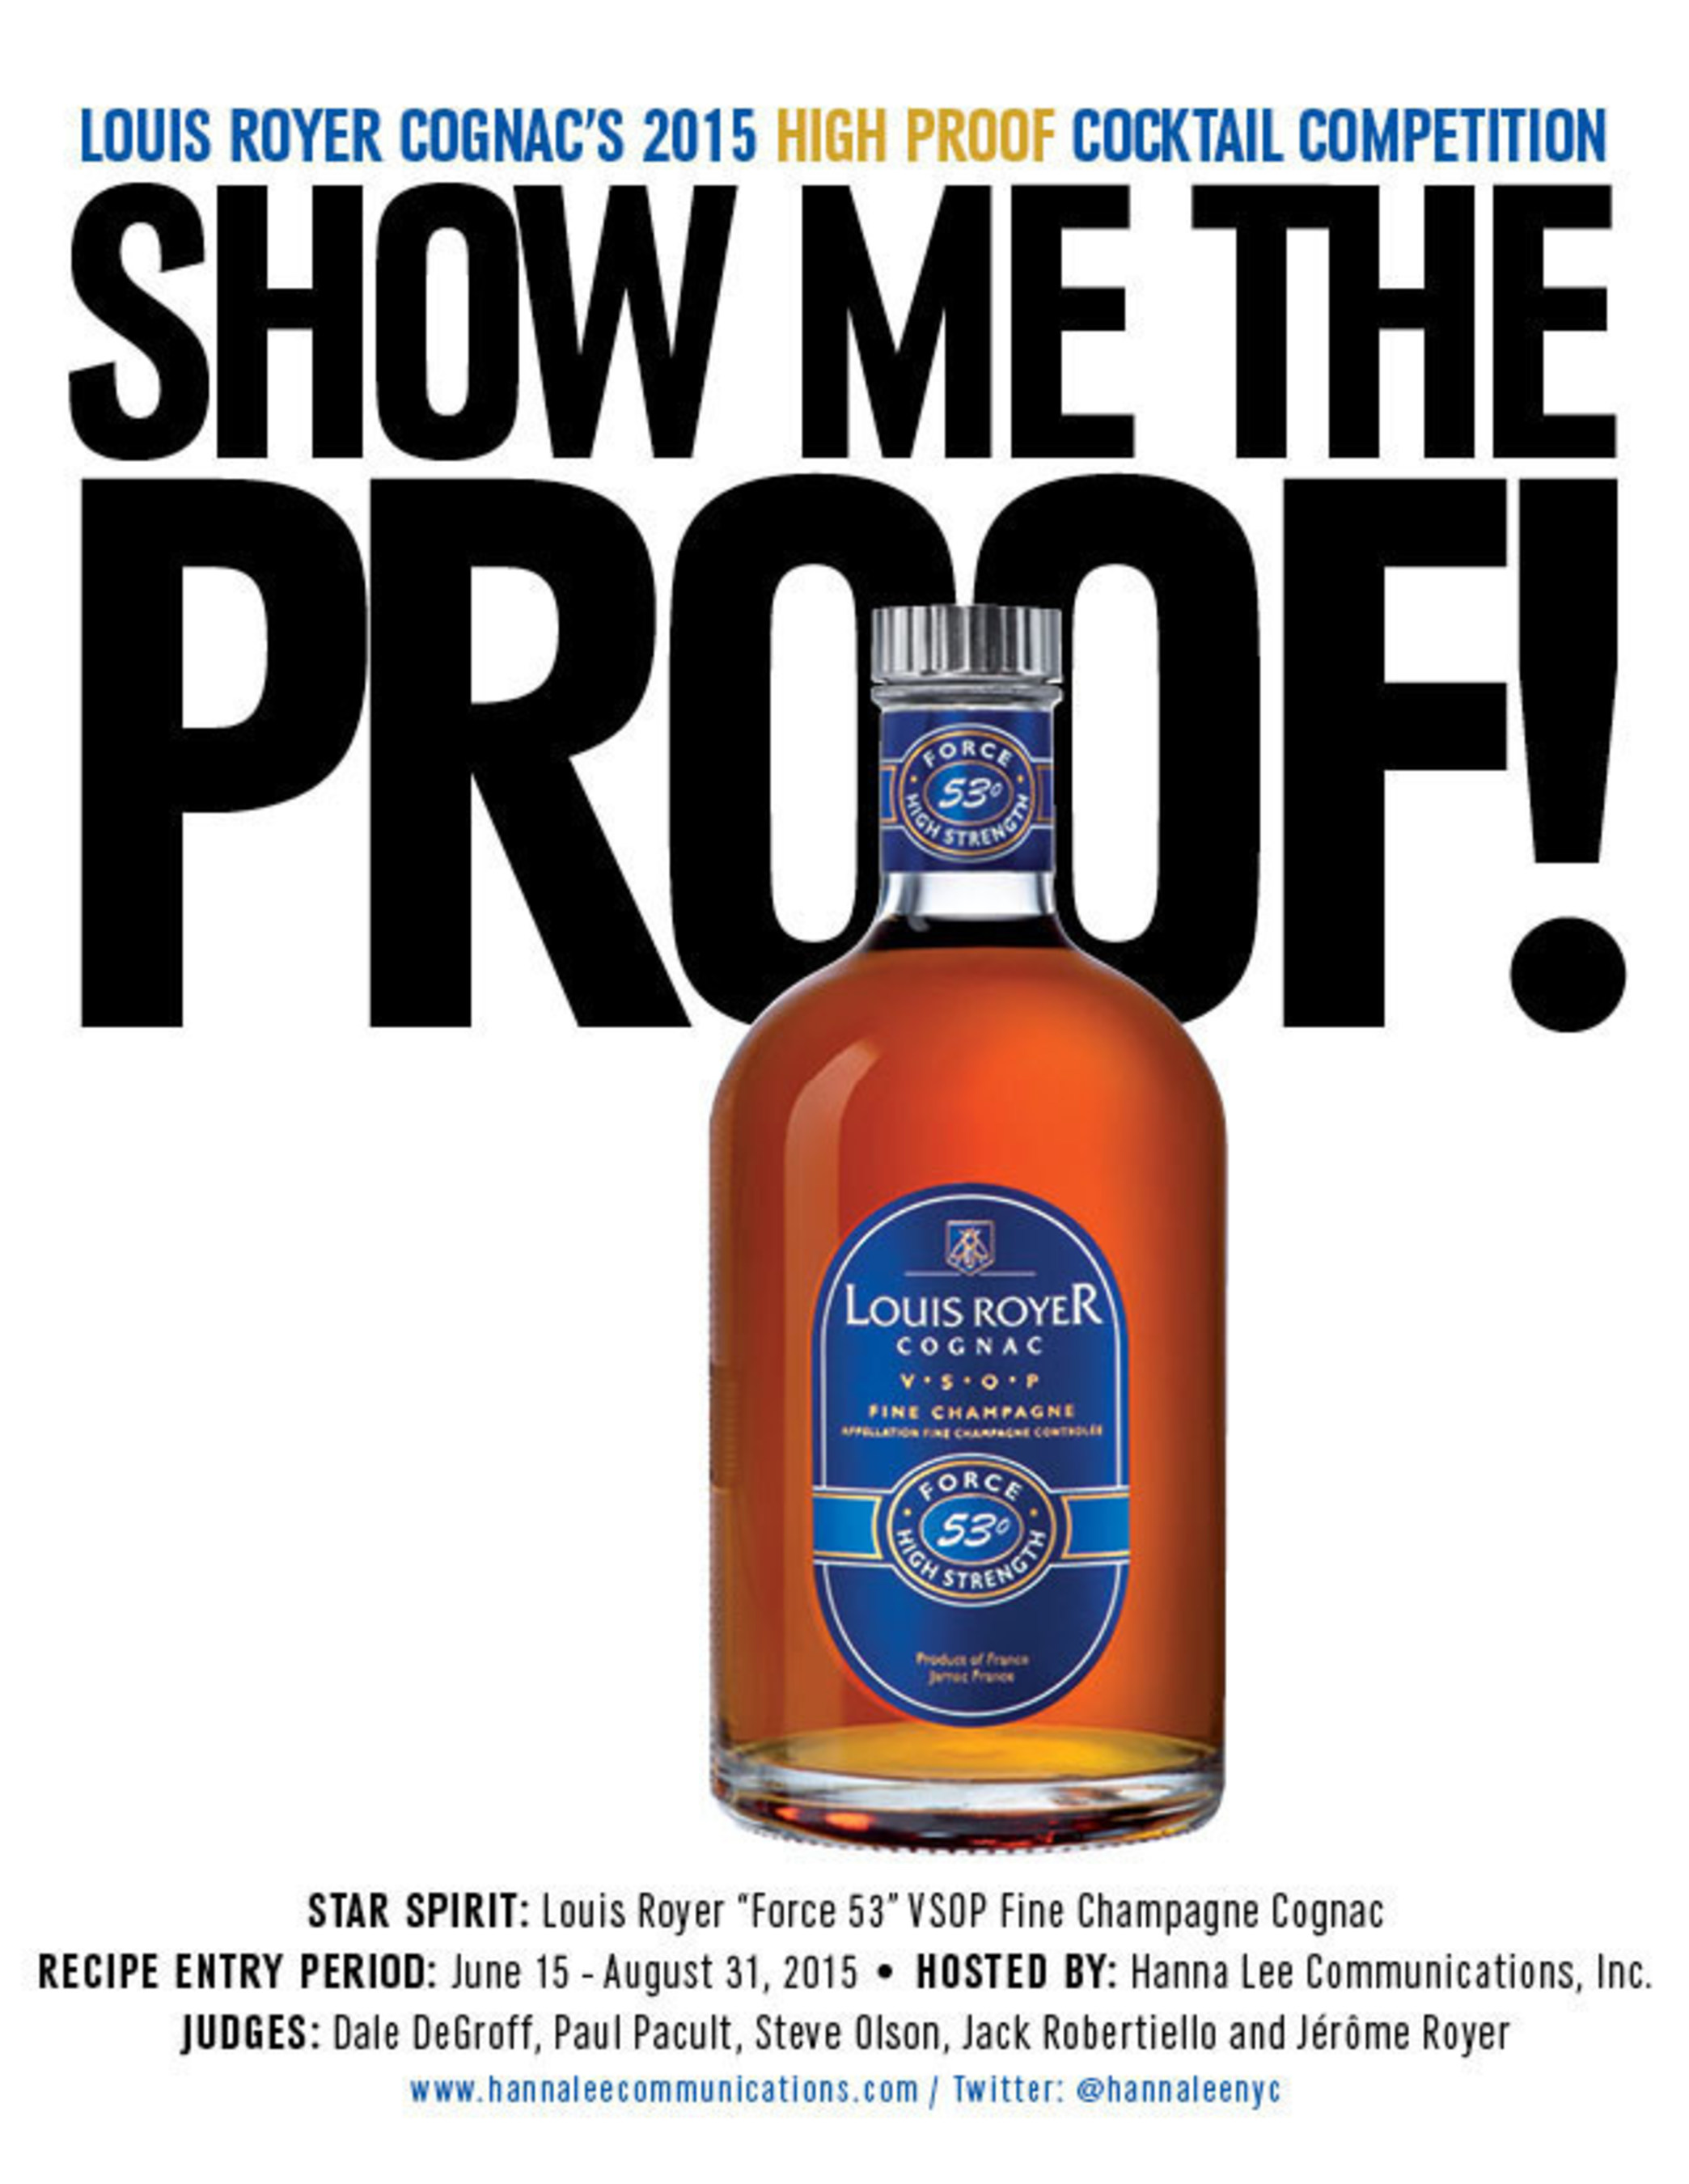 Louis Royer Cognac, the Leader of the Overproof Cognac Trend, Announces the 4th "Show Me the Proof!" High Proof Cognac Cocktail Competition, Accepting Entries June 15 through August 31, 2015 to Celebrate Its "Force 53" VSOP Fine Champagne Cognac